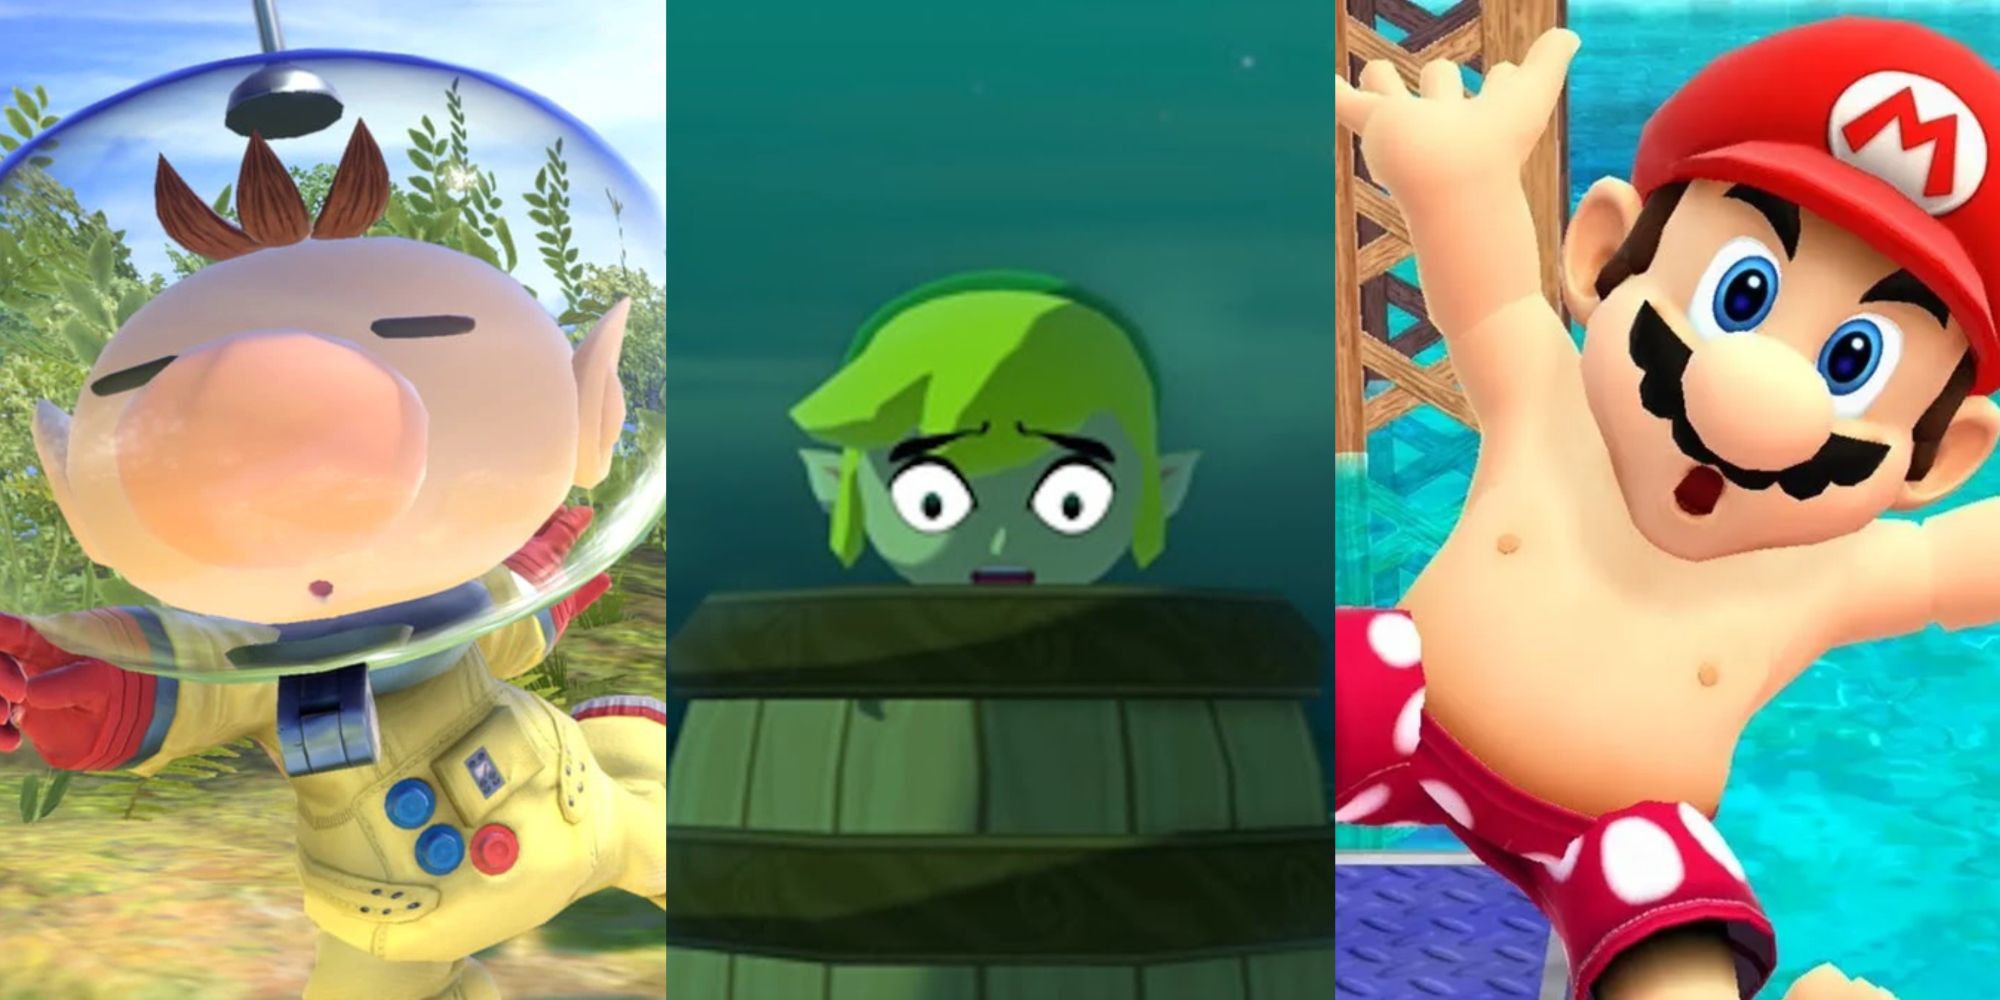 Olimar, Link, and Mario all with unique expressions on their faces